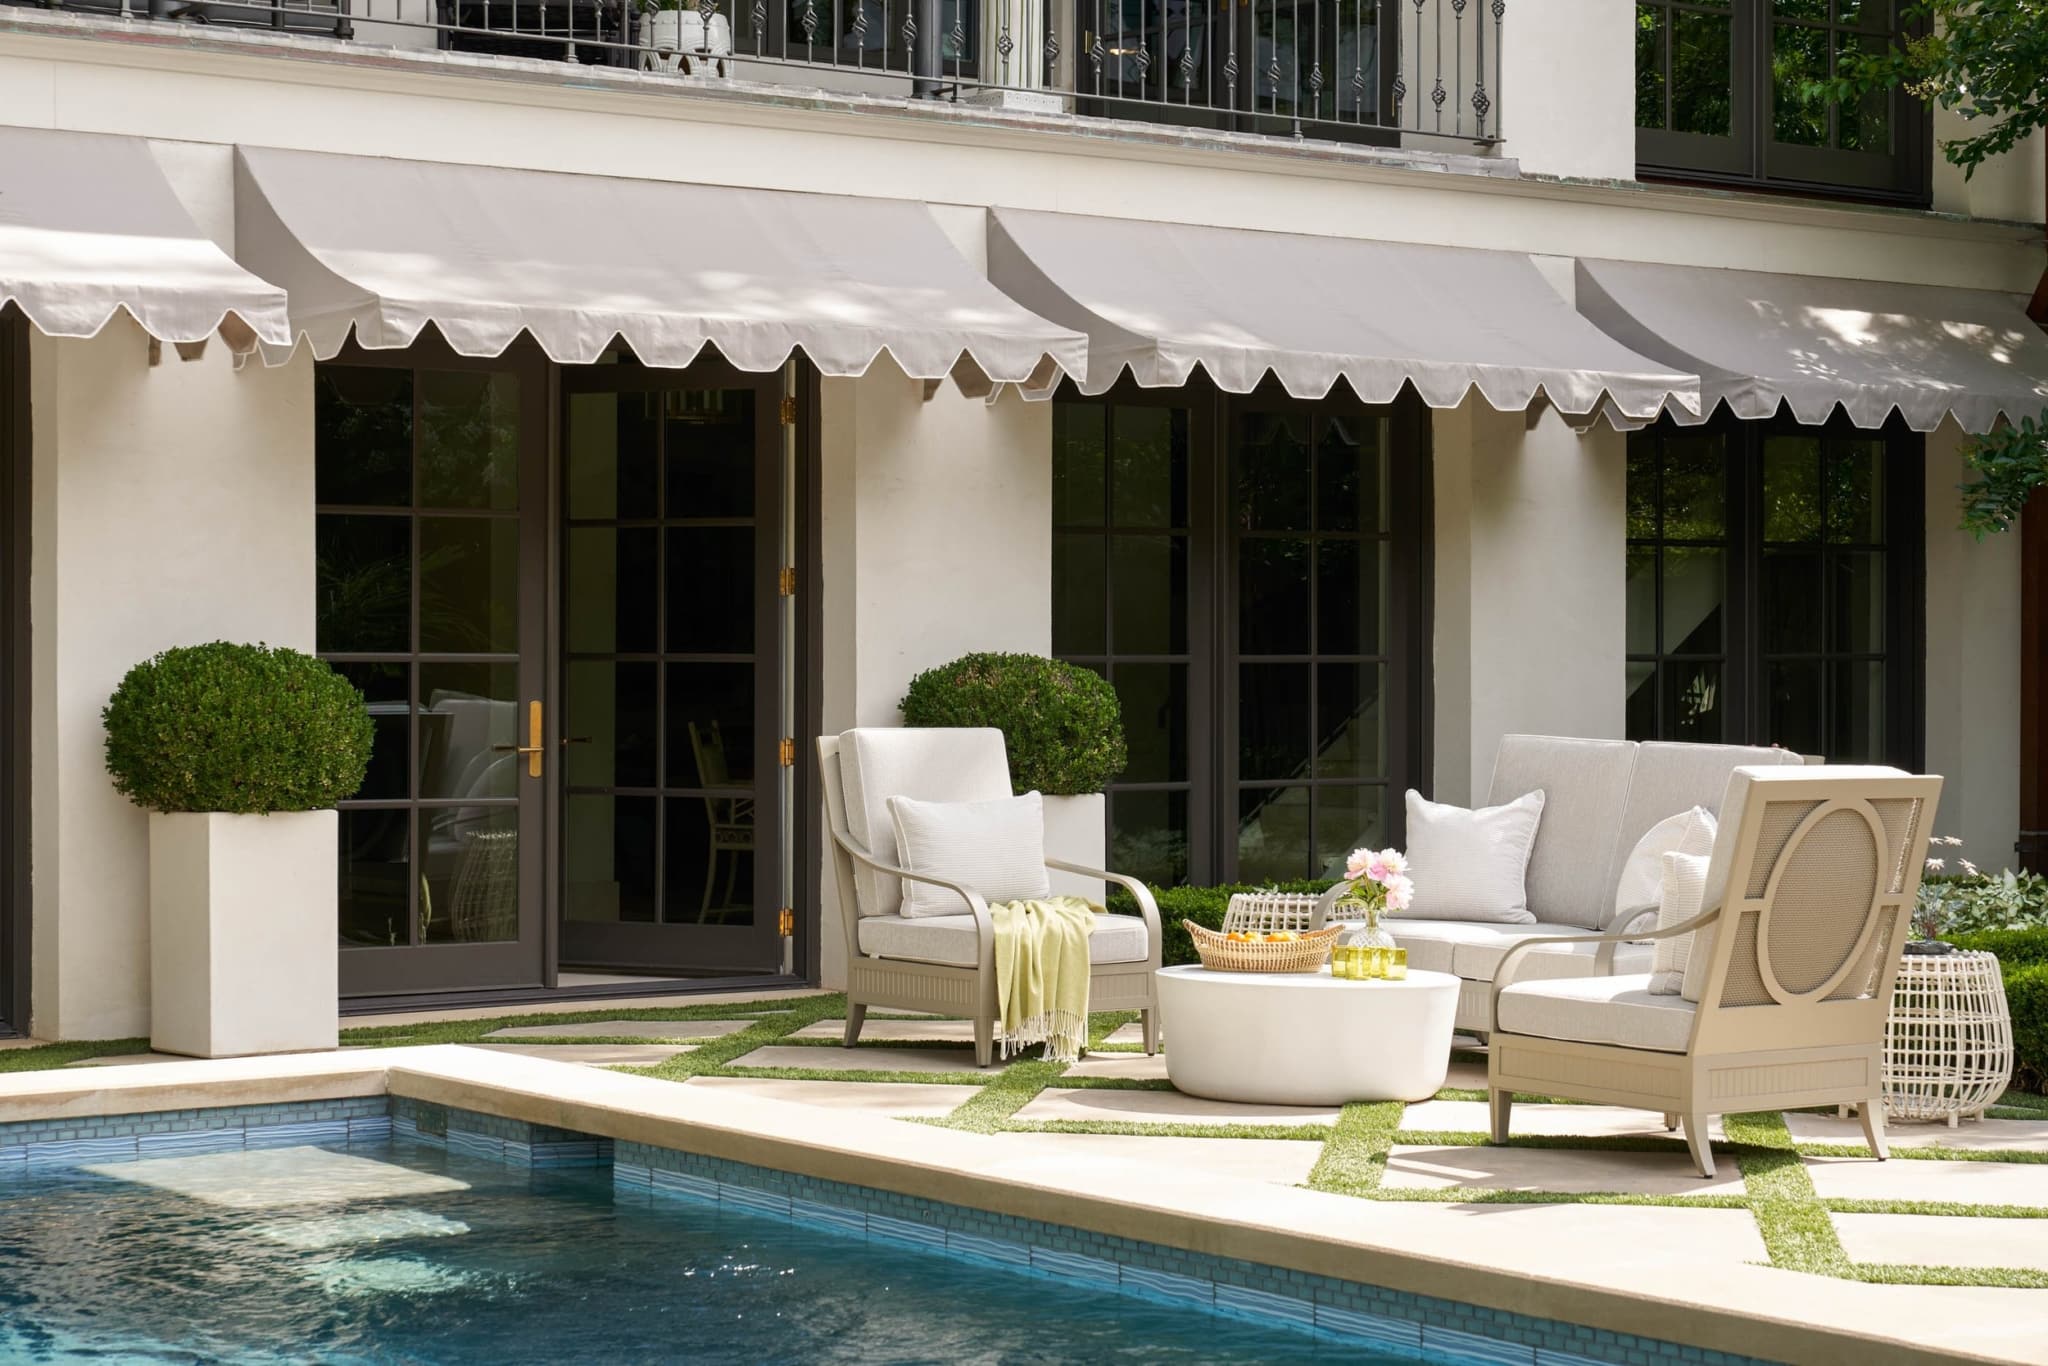 Jenkins Interiors | Schroder Photography - outdoor, patio, scalloped awning, pool, poolside